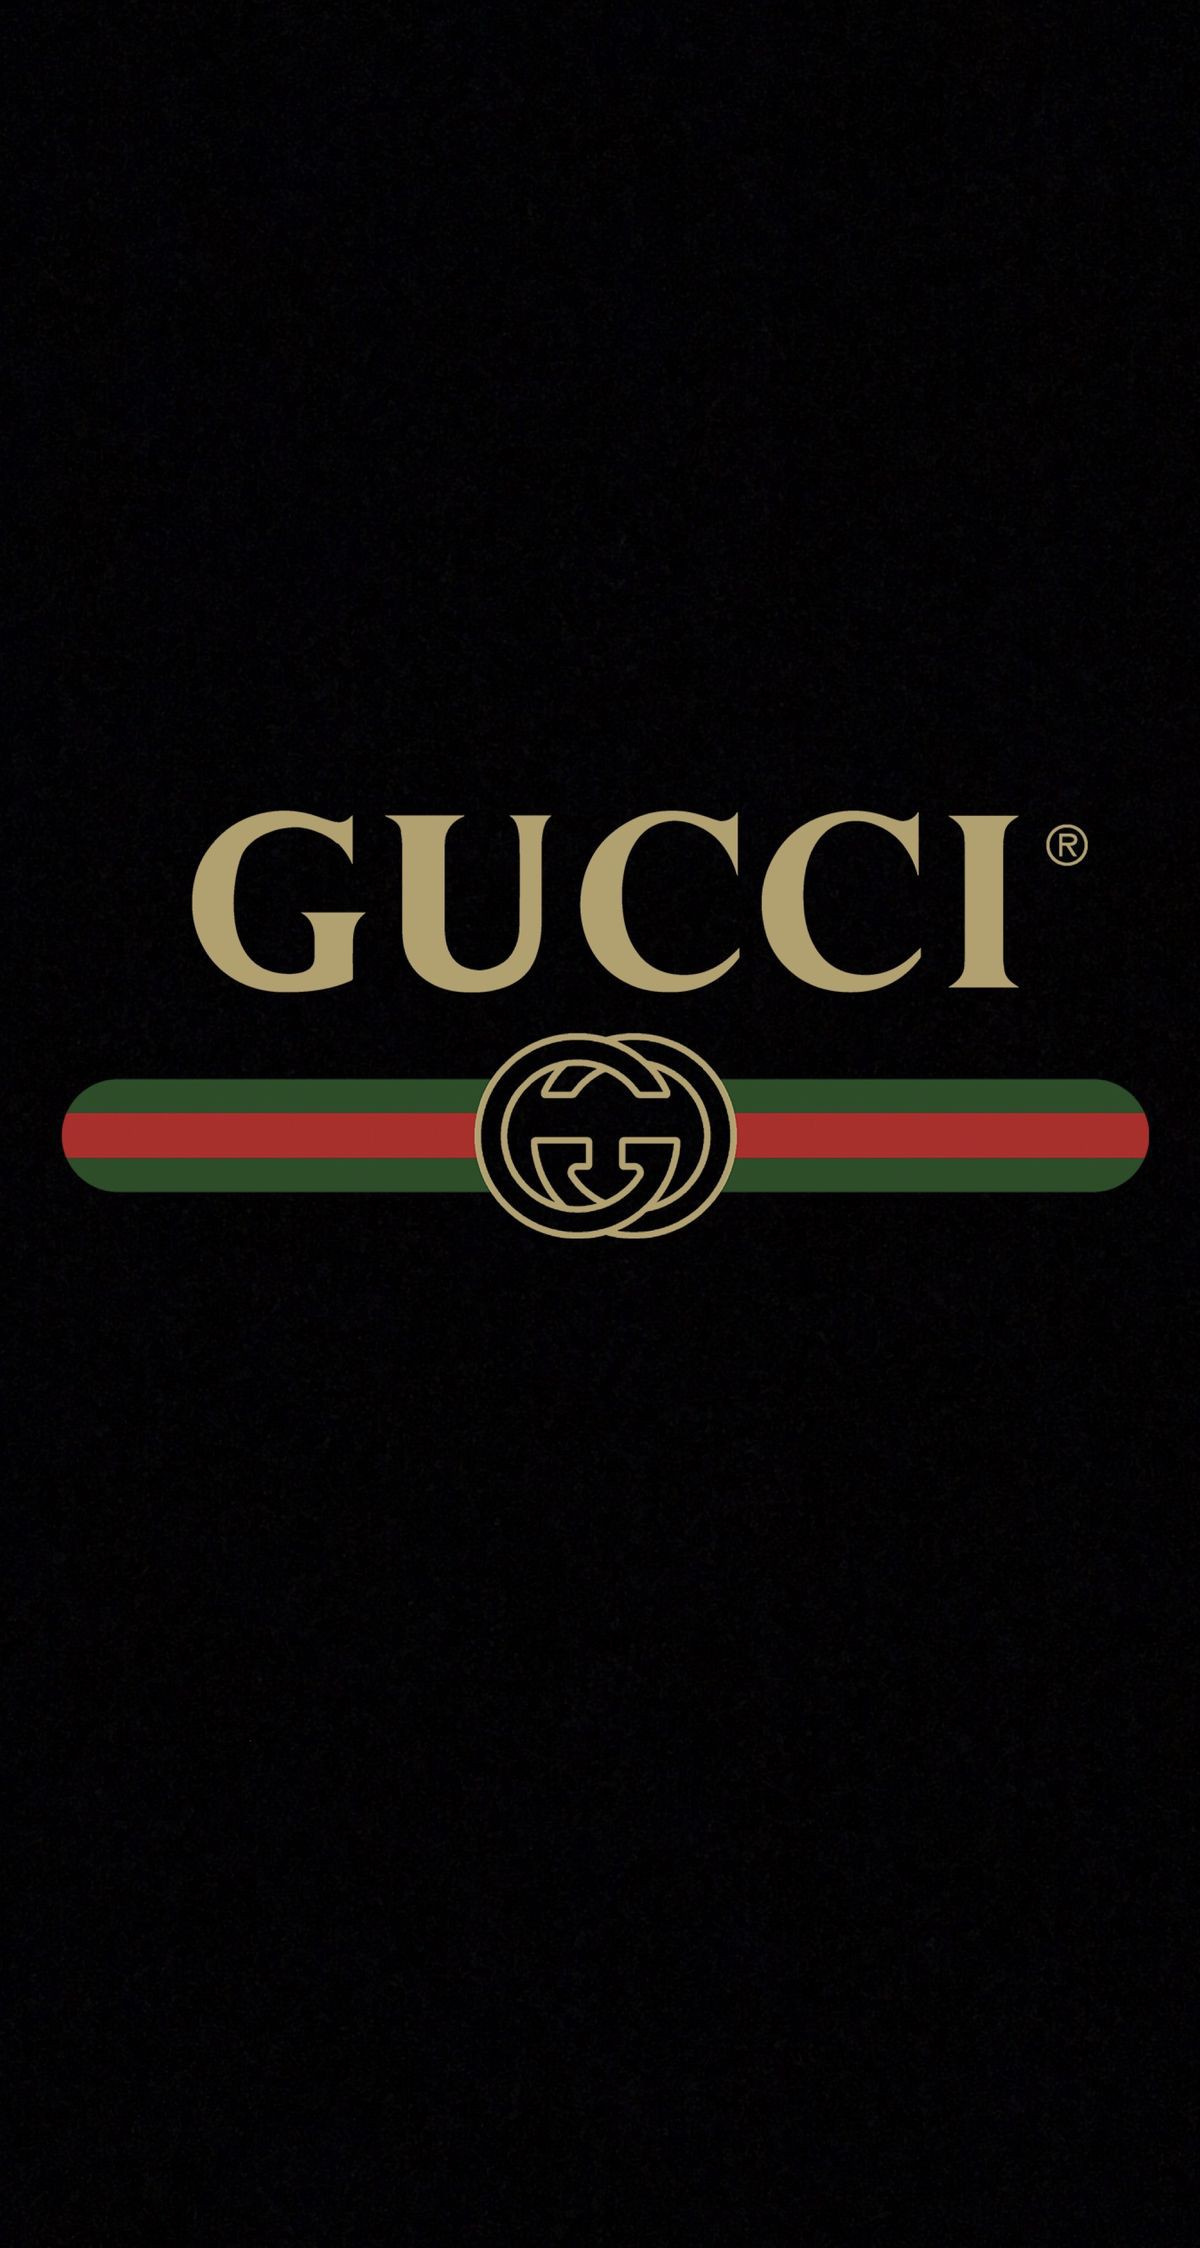 Gucci Wallpaper For Android